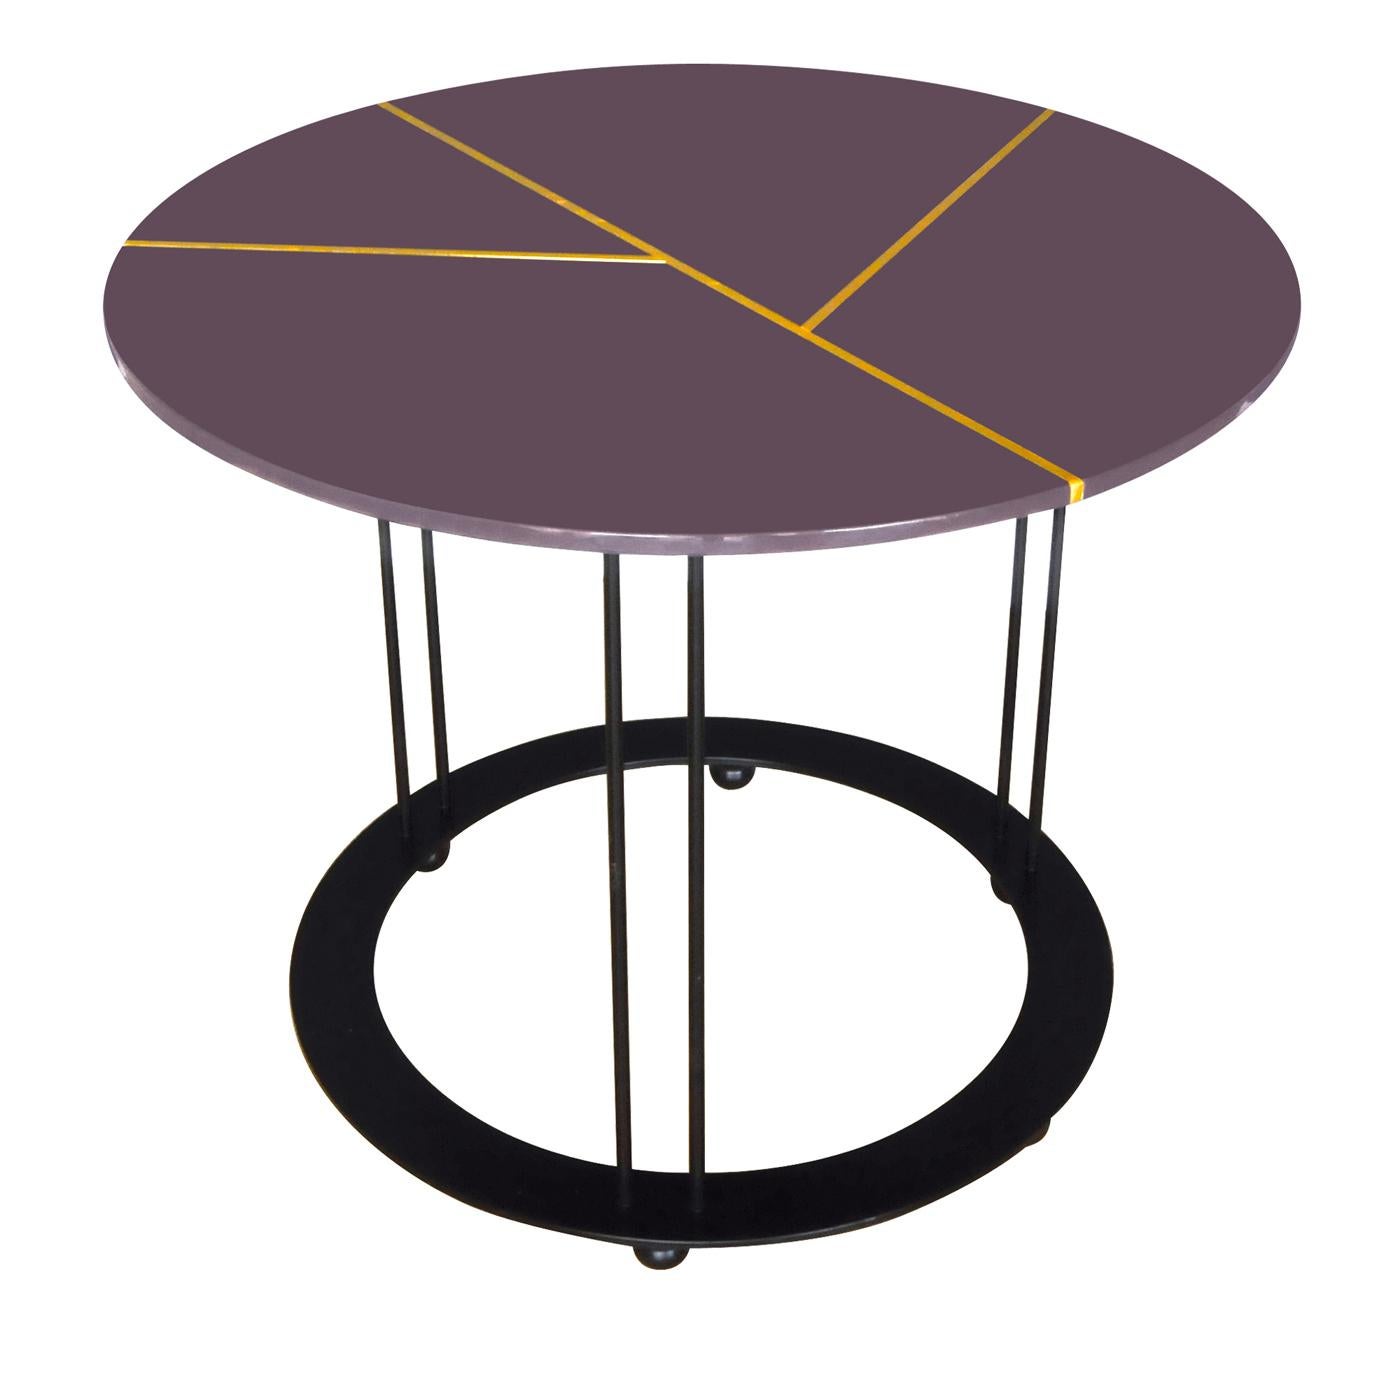 This coffee table exudes strong visual allure in its clean, essential design. A timeless piece, it is composed of a metal base with a matte black powder finish that boasts three pairs of slim legs mounted on a sturdy, ring-shaped base. The wooden